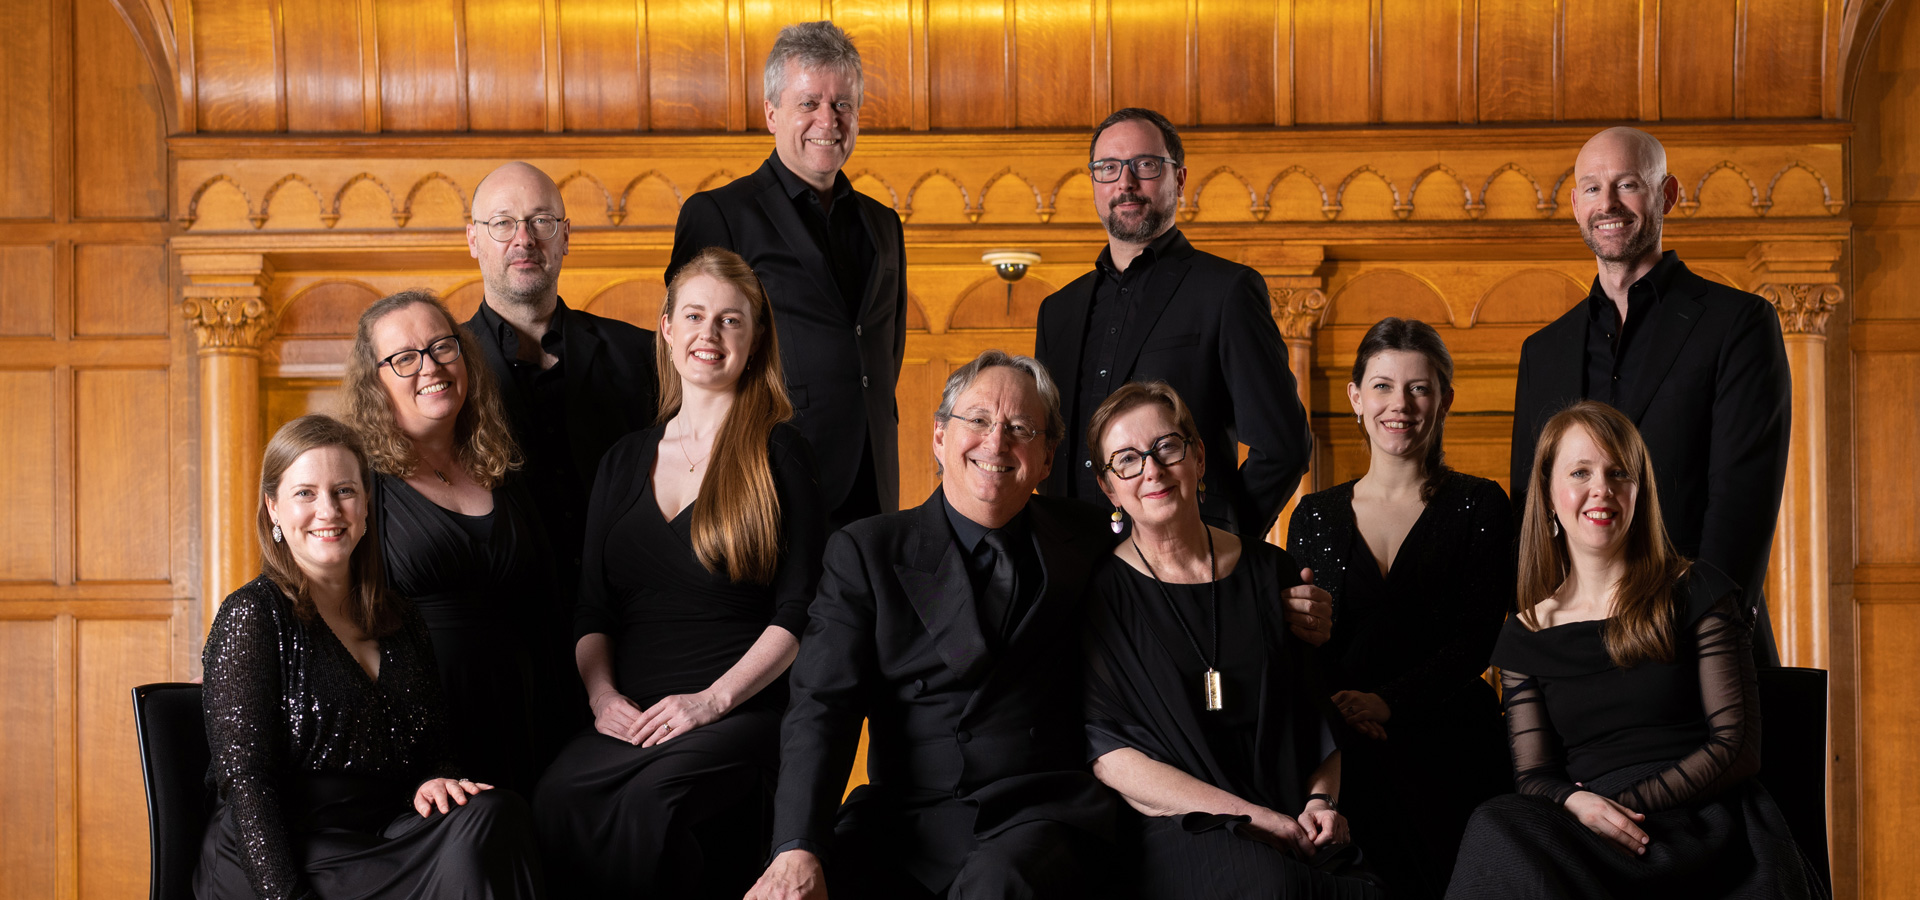 The Tallis Scholars smile happily at the camera while wearing black formal clothing, posing as a group in front of a gold wooden mantle.